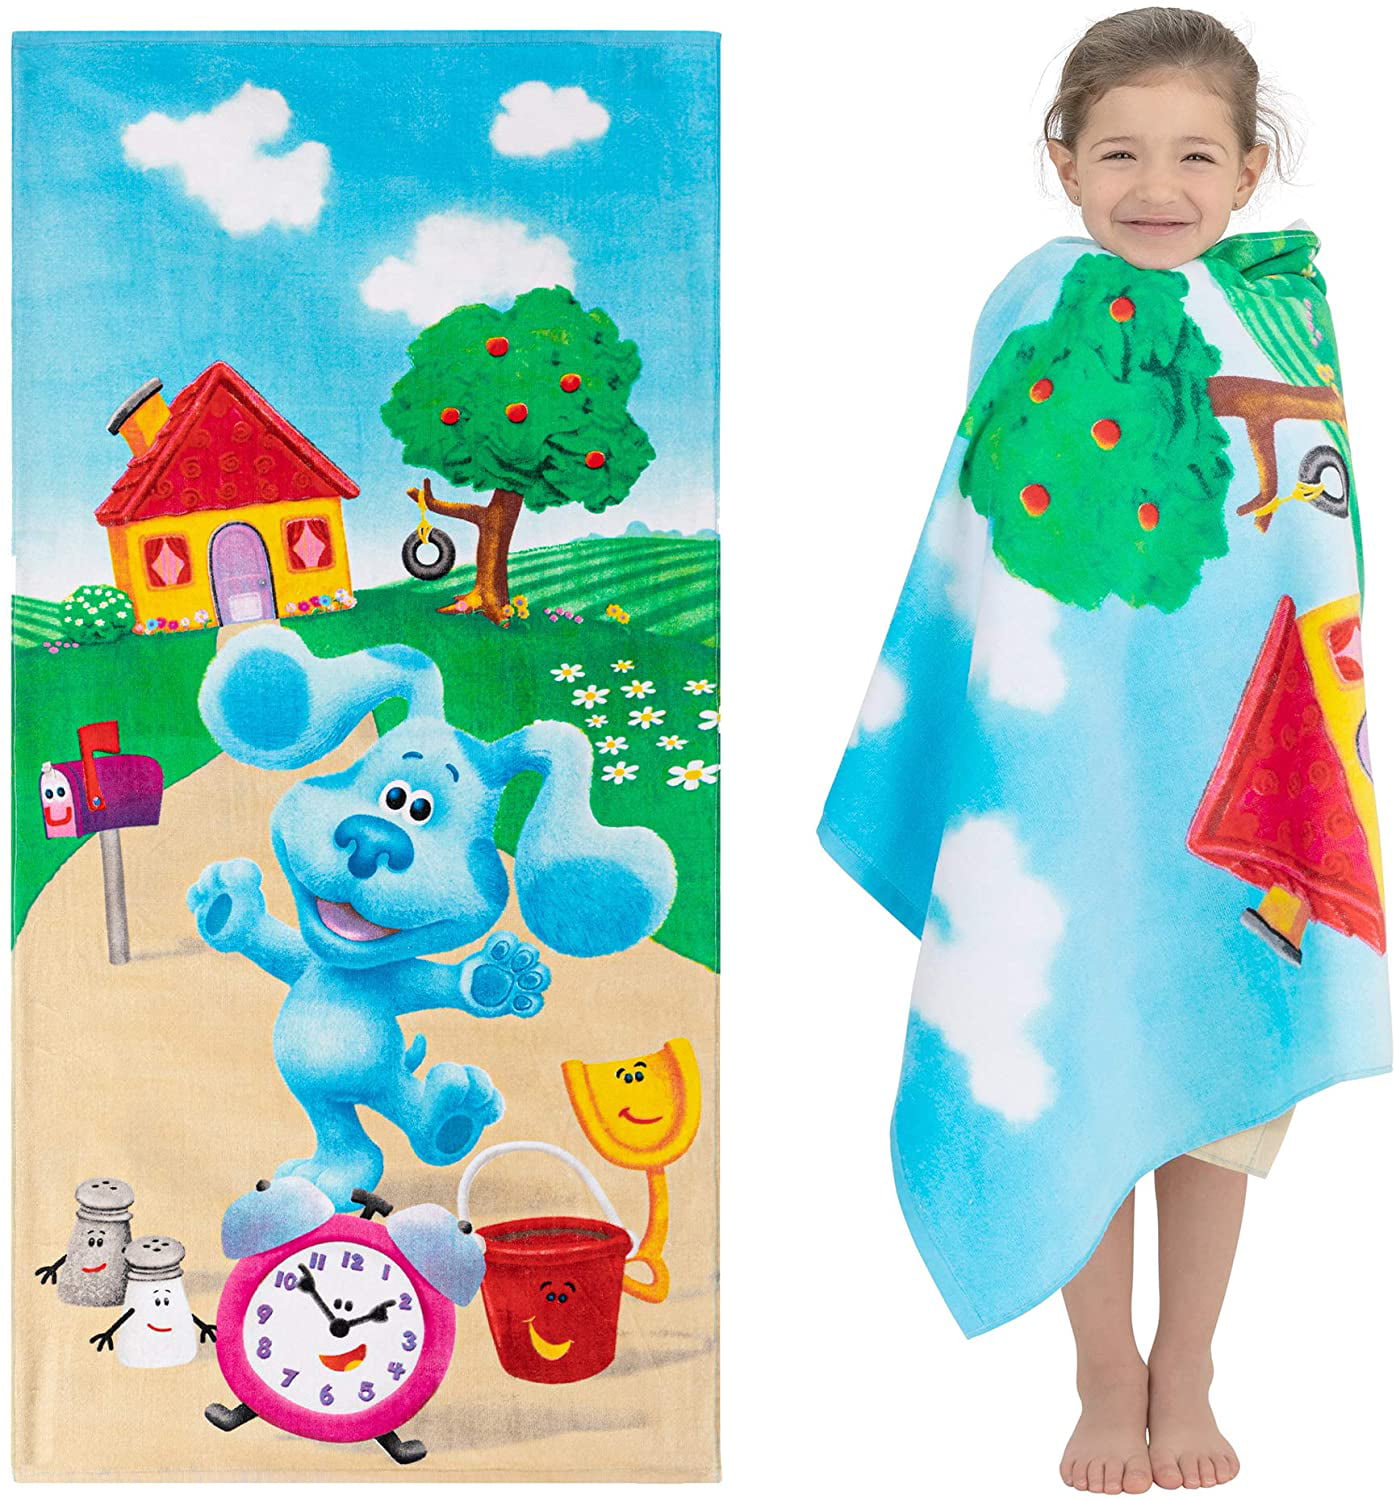 H W X 58 in Phineas and Ferb  Beach Towel Bath Towel Cotton 28 in 